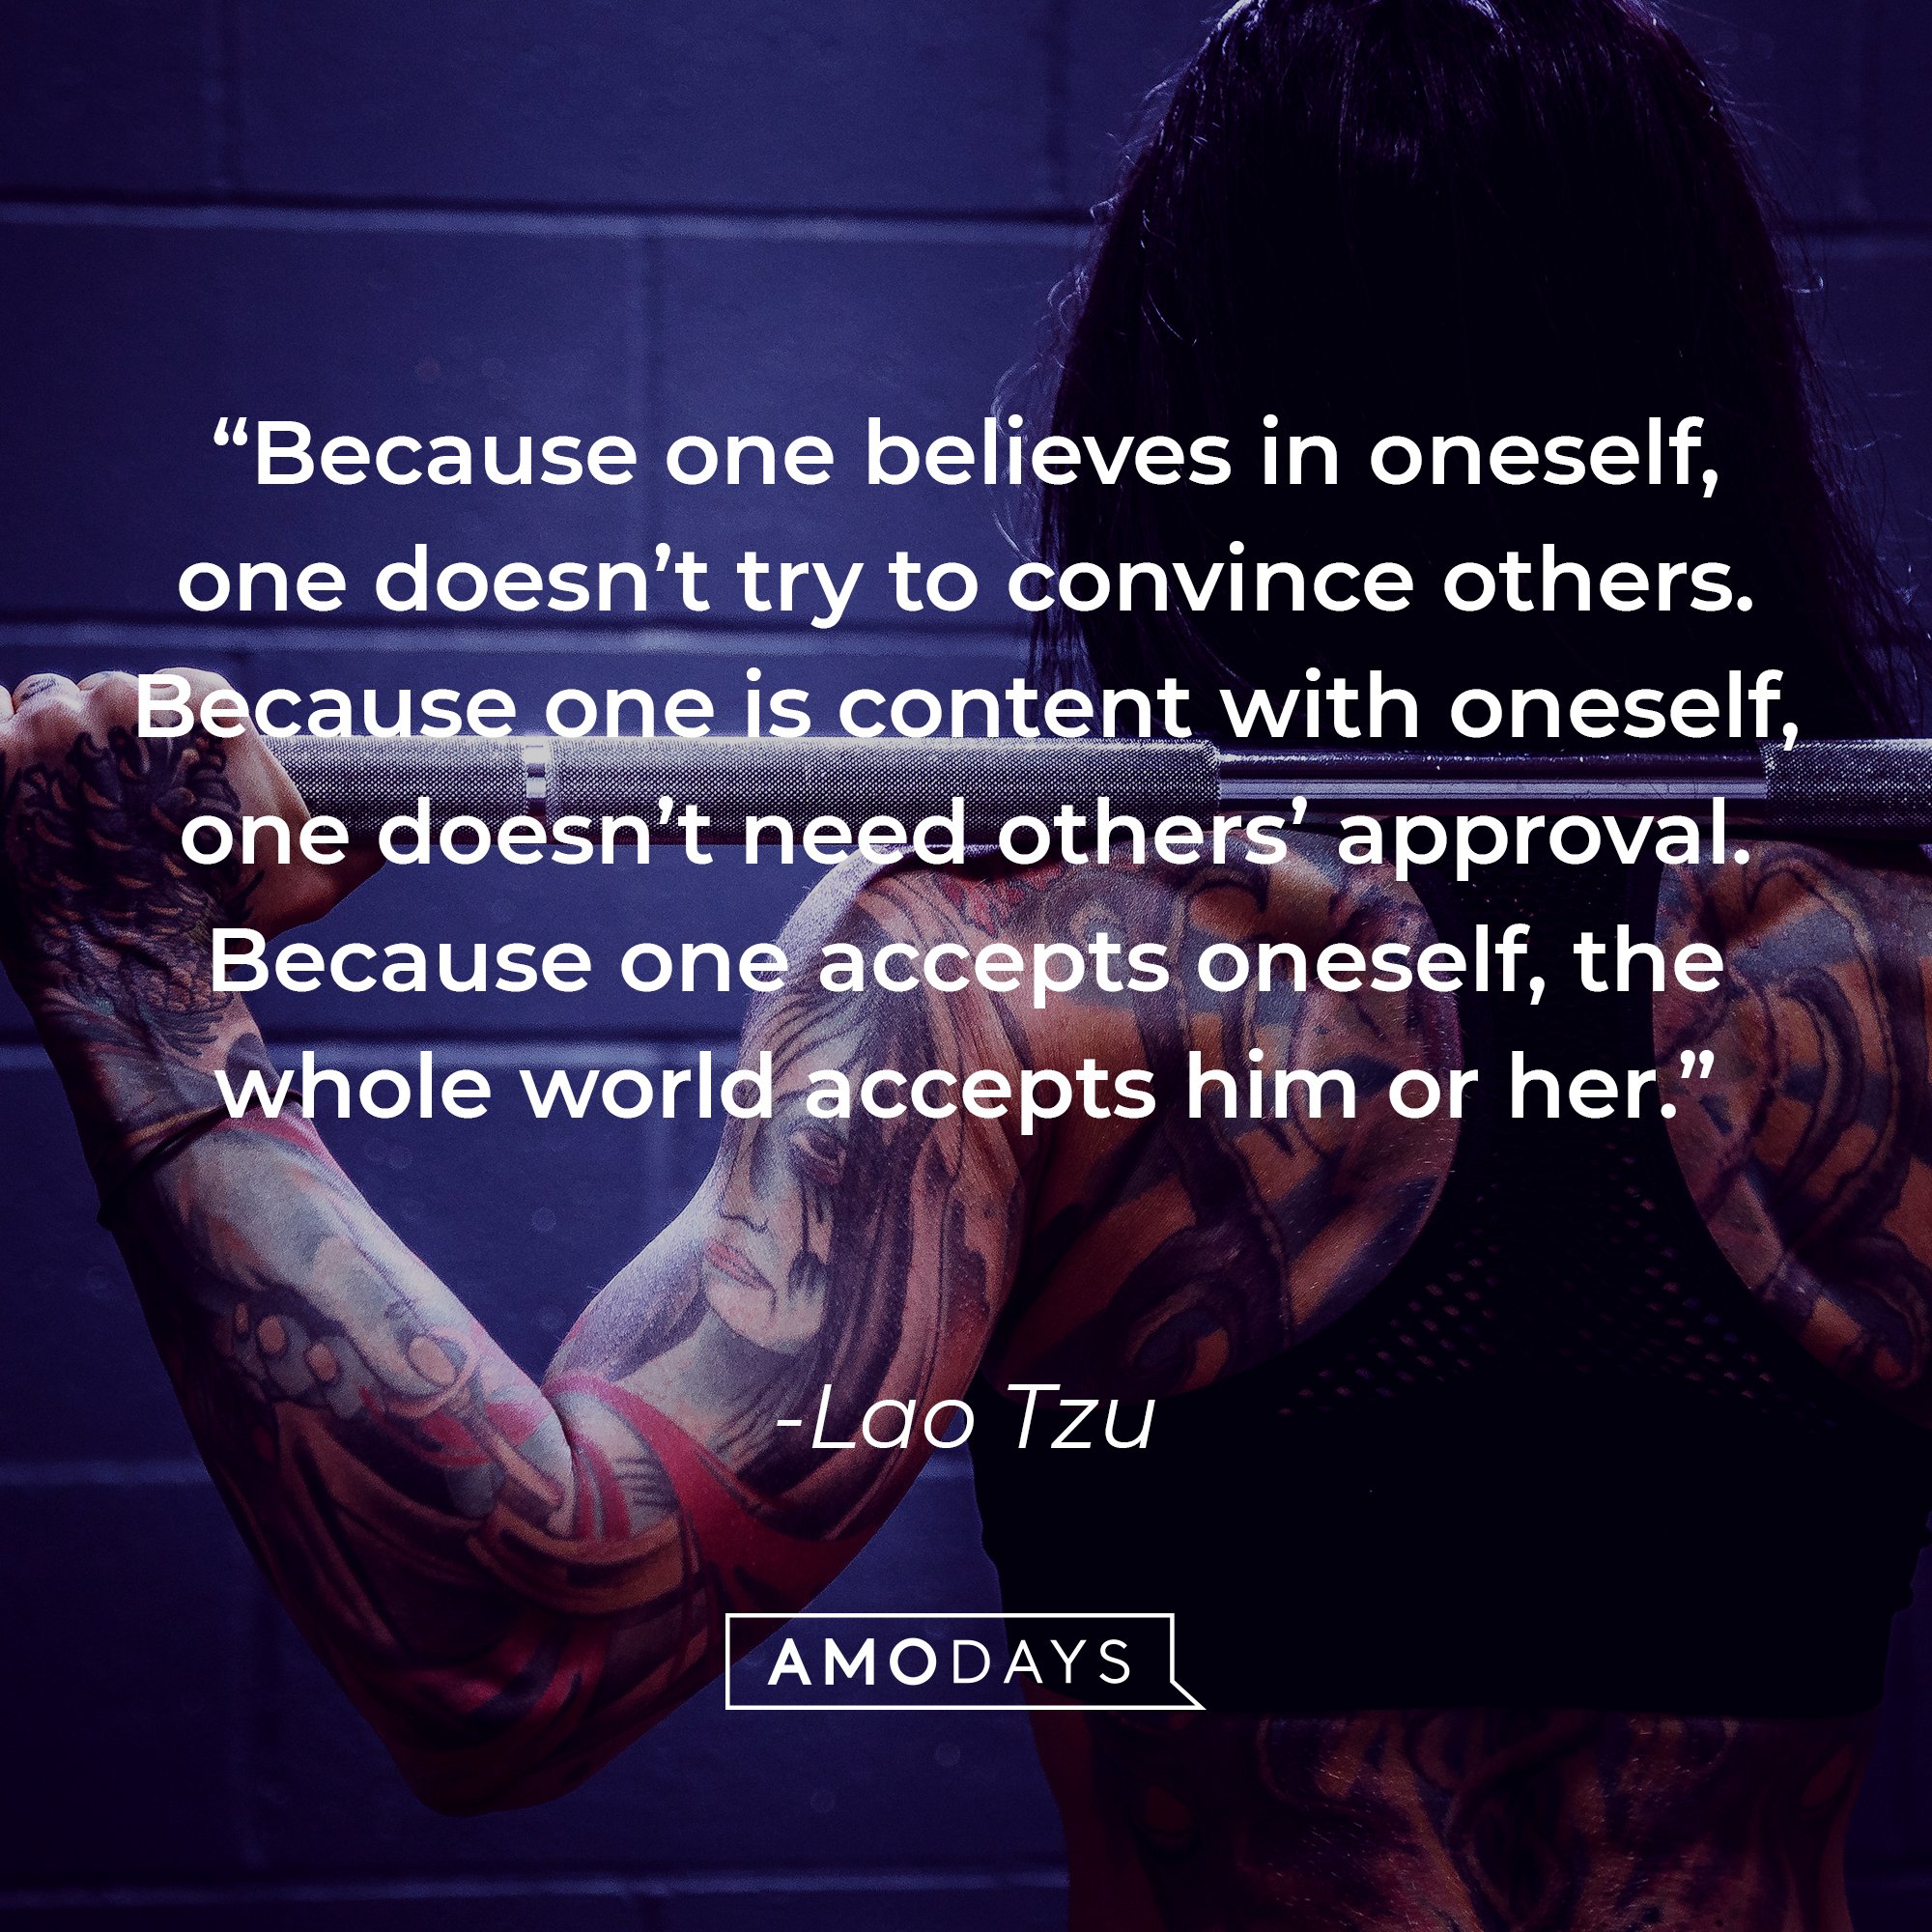  Lao Tzu's quote: “Because one believes in oneself, one doesn’t try to convince others. Because one is content with oneself, one doesn’t need others’ approval. Because one accepts oneself, the whole world accepts him or her.” | Image: AmoDays